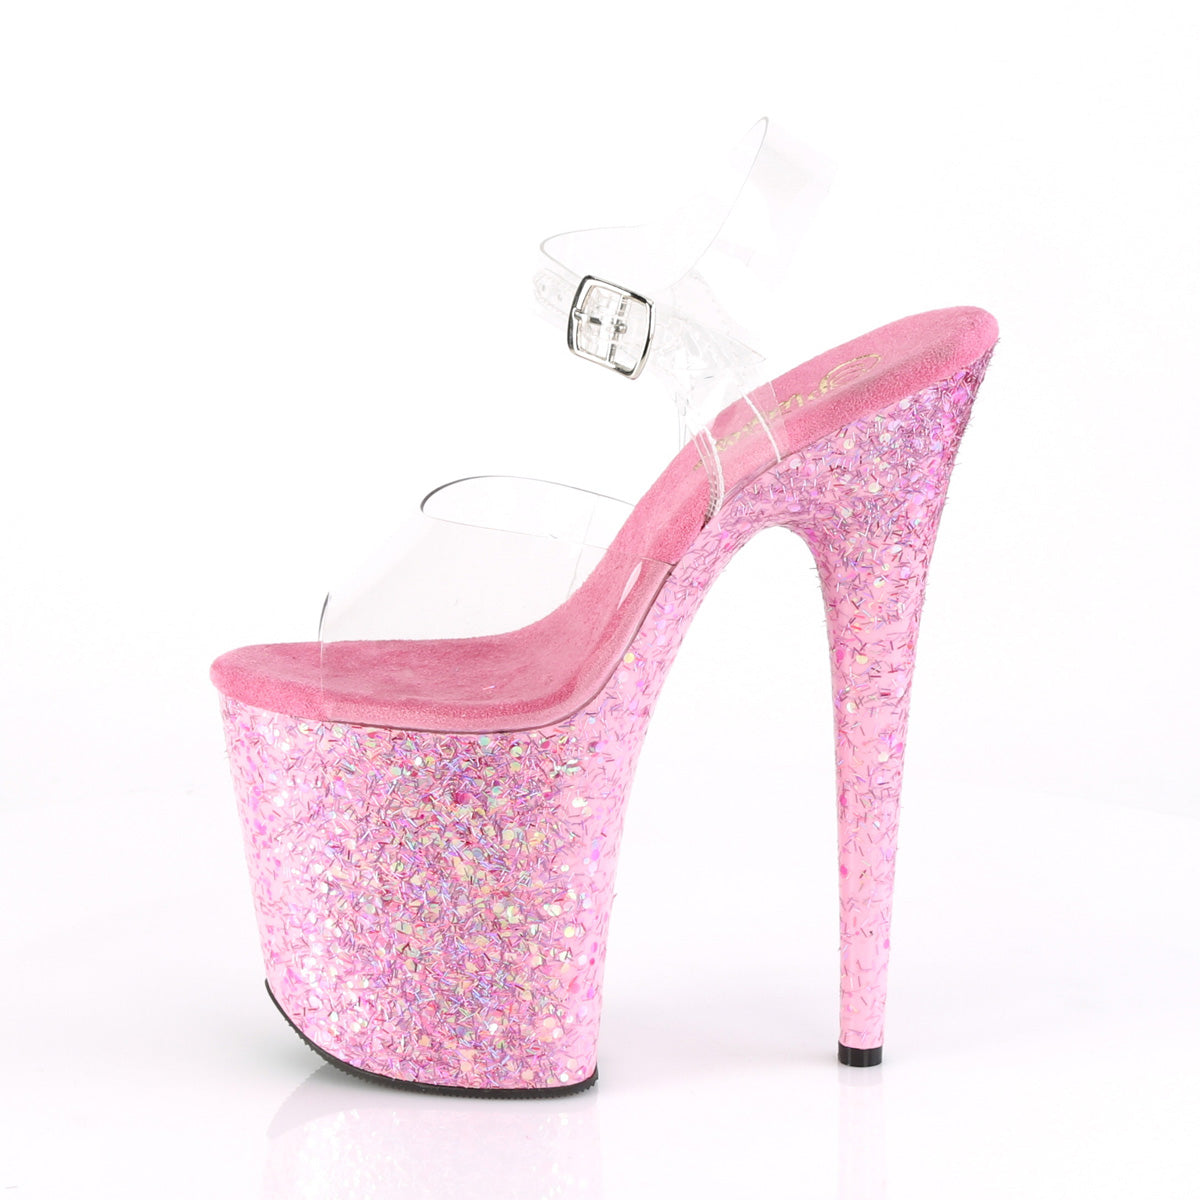 FLAMINGO-808CF 8" Heel Clear Pink Confetti Strippers Shoes-Pleaser- Sexy Shoes Pole Dance Heels